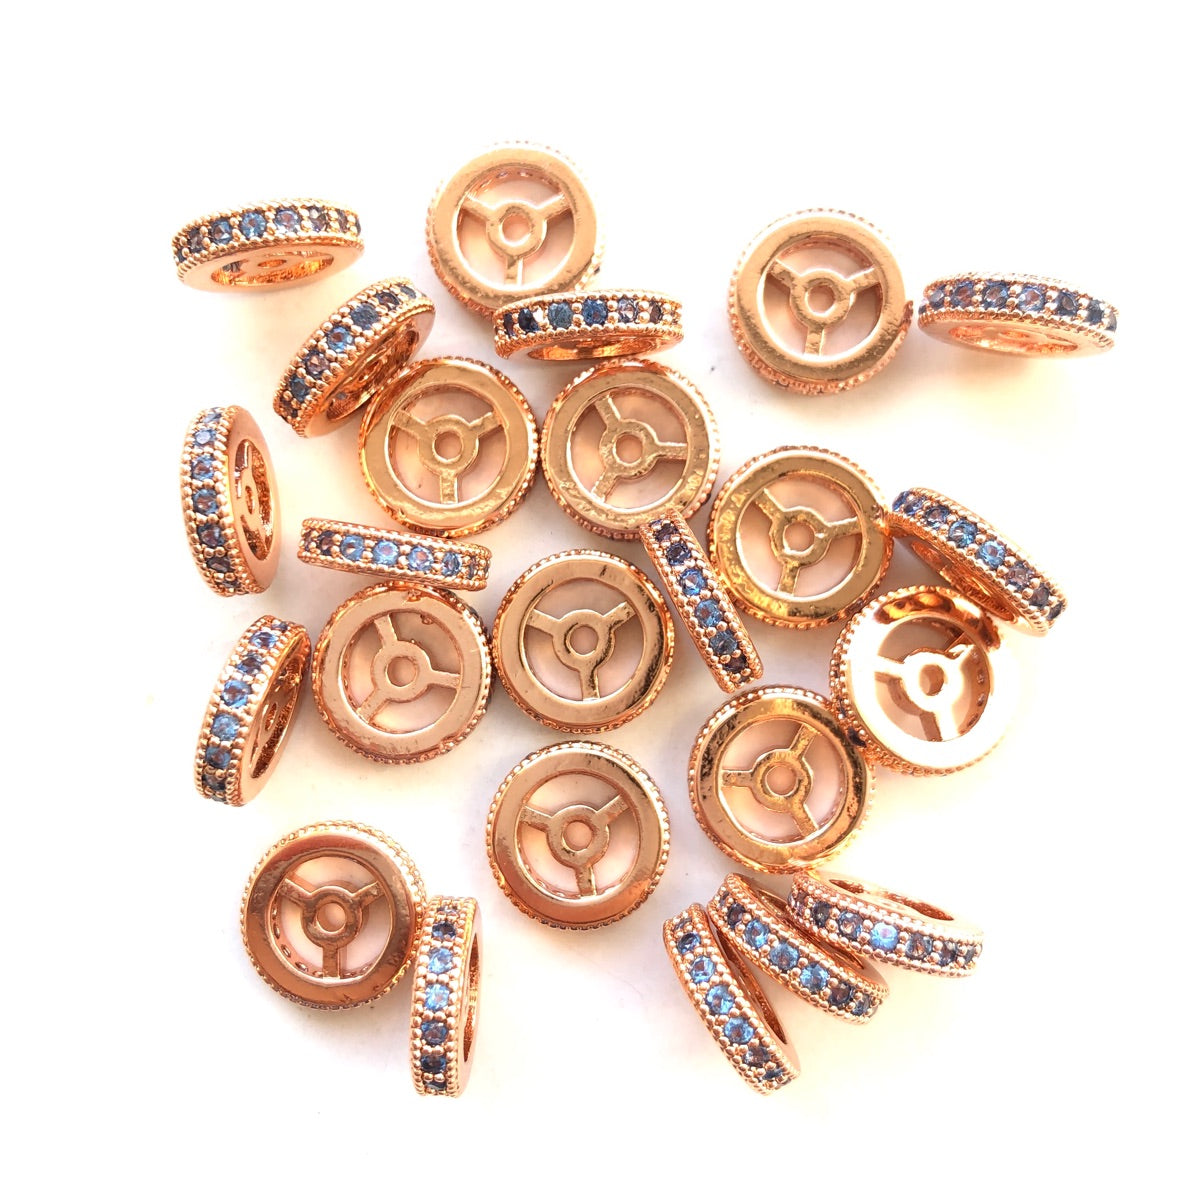 20pcs/lot 9.6/12mm Lake Blue CZ Paved Wheel Rondelle Spacers Rose Gold CZ Paved Spacers New Spacers Arrivals Rondelle Beads Charms Beads Beyond